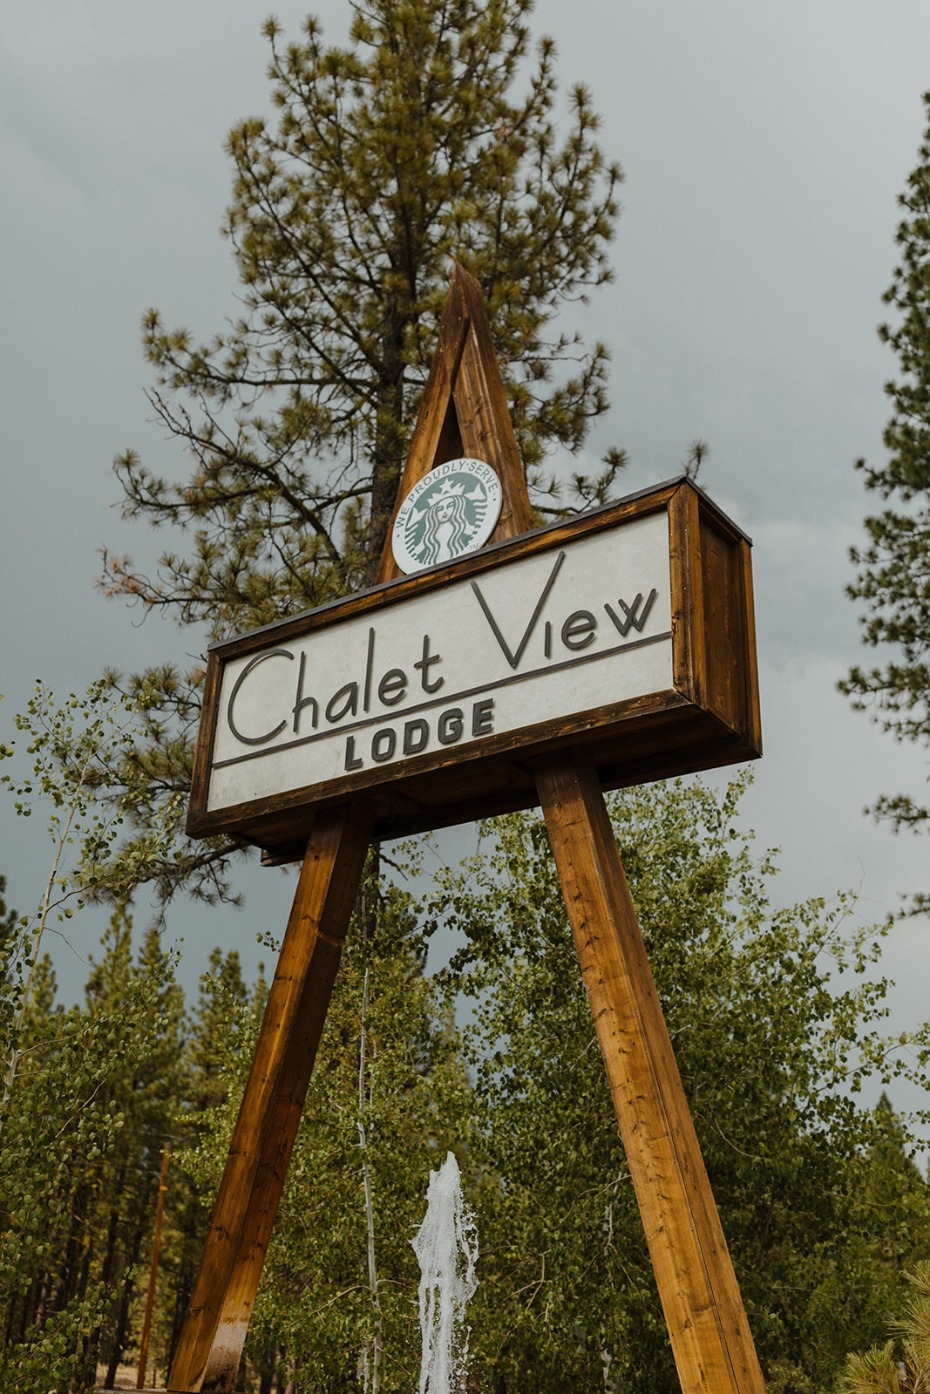 5 Times Chalet View Lodge Totally Delivered On Its Name